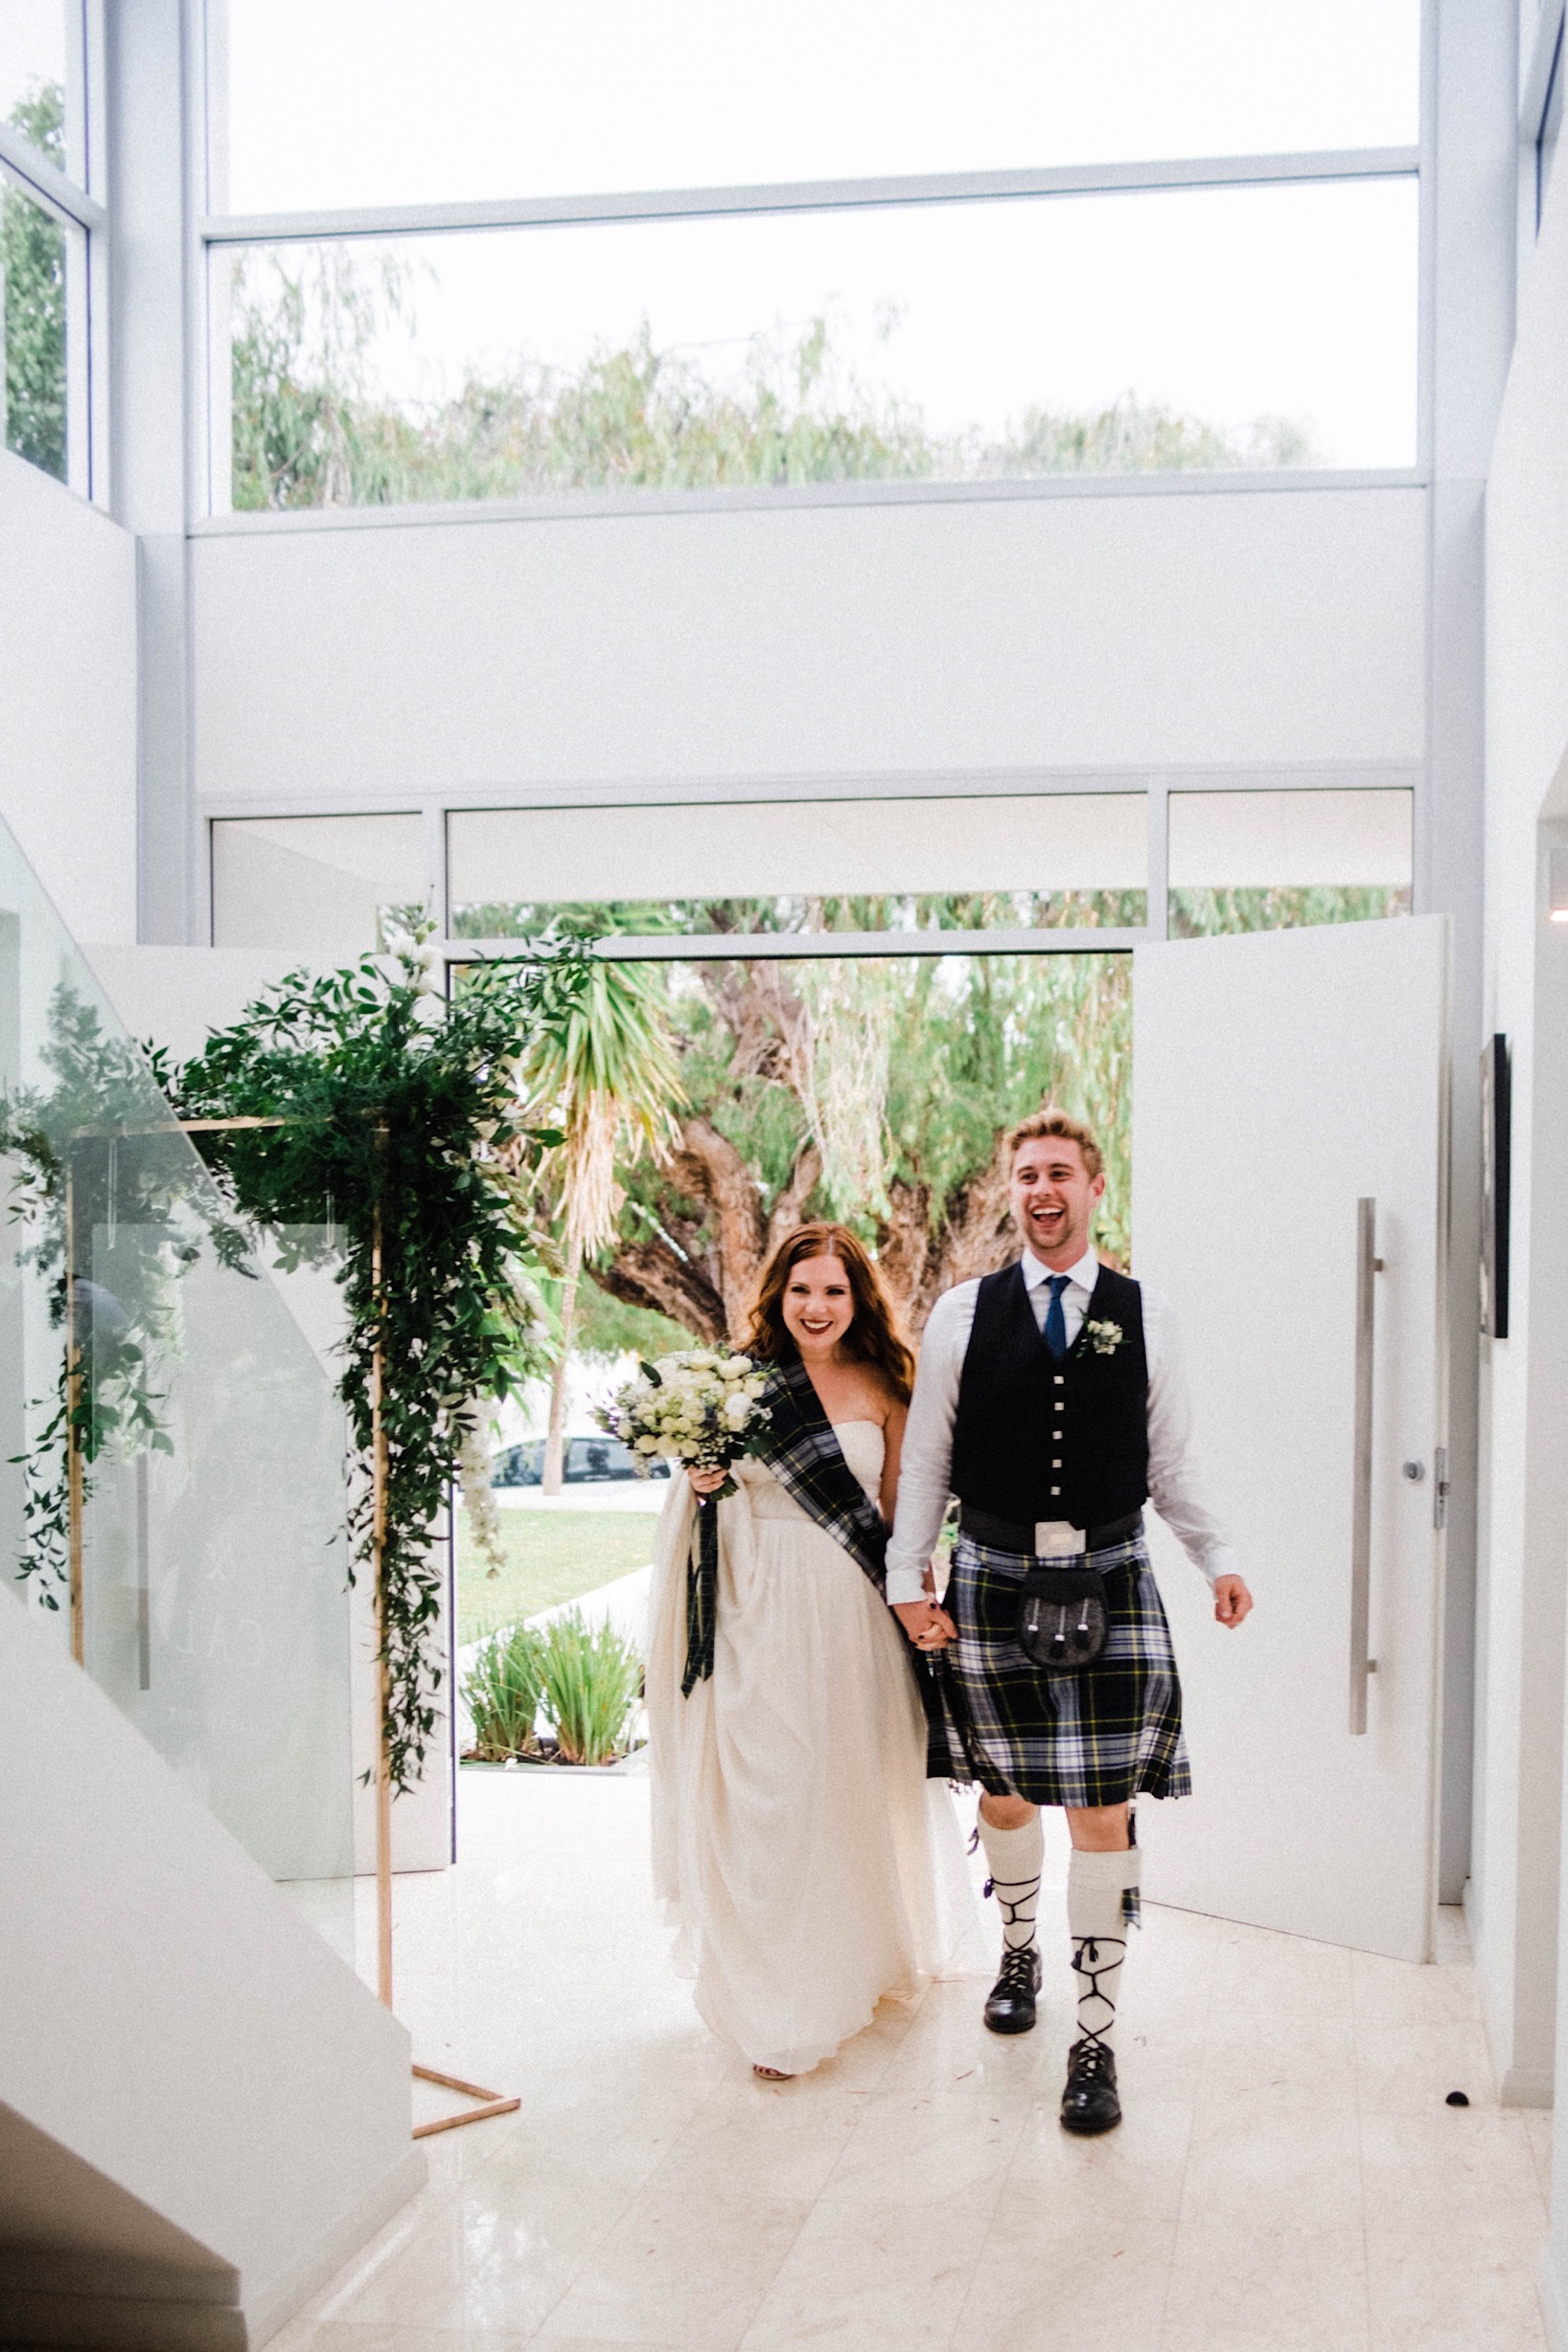 Documentary Wedding Photography of Becky & Cal arriving at their Sustainable Backyard Wedding.